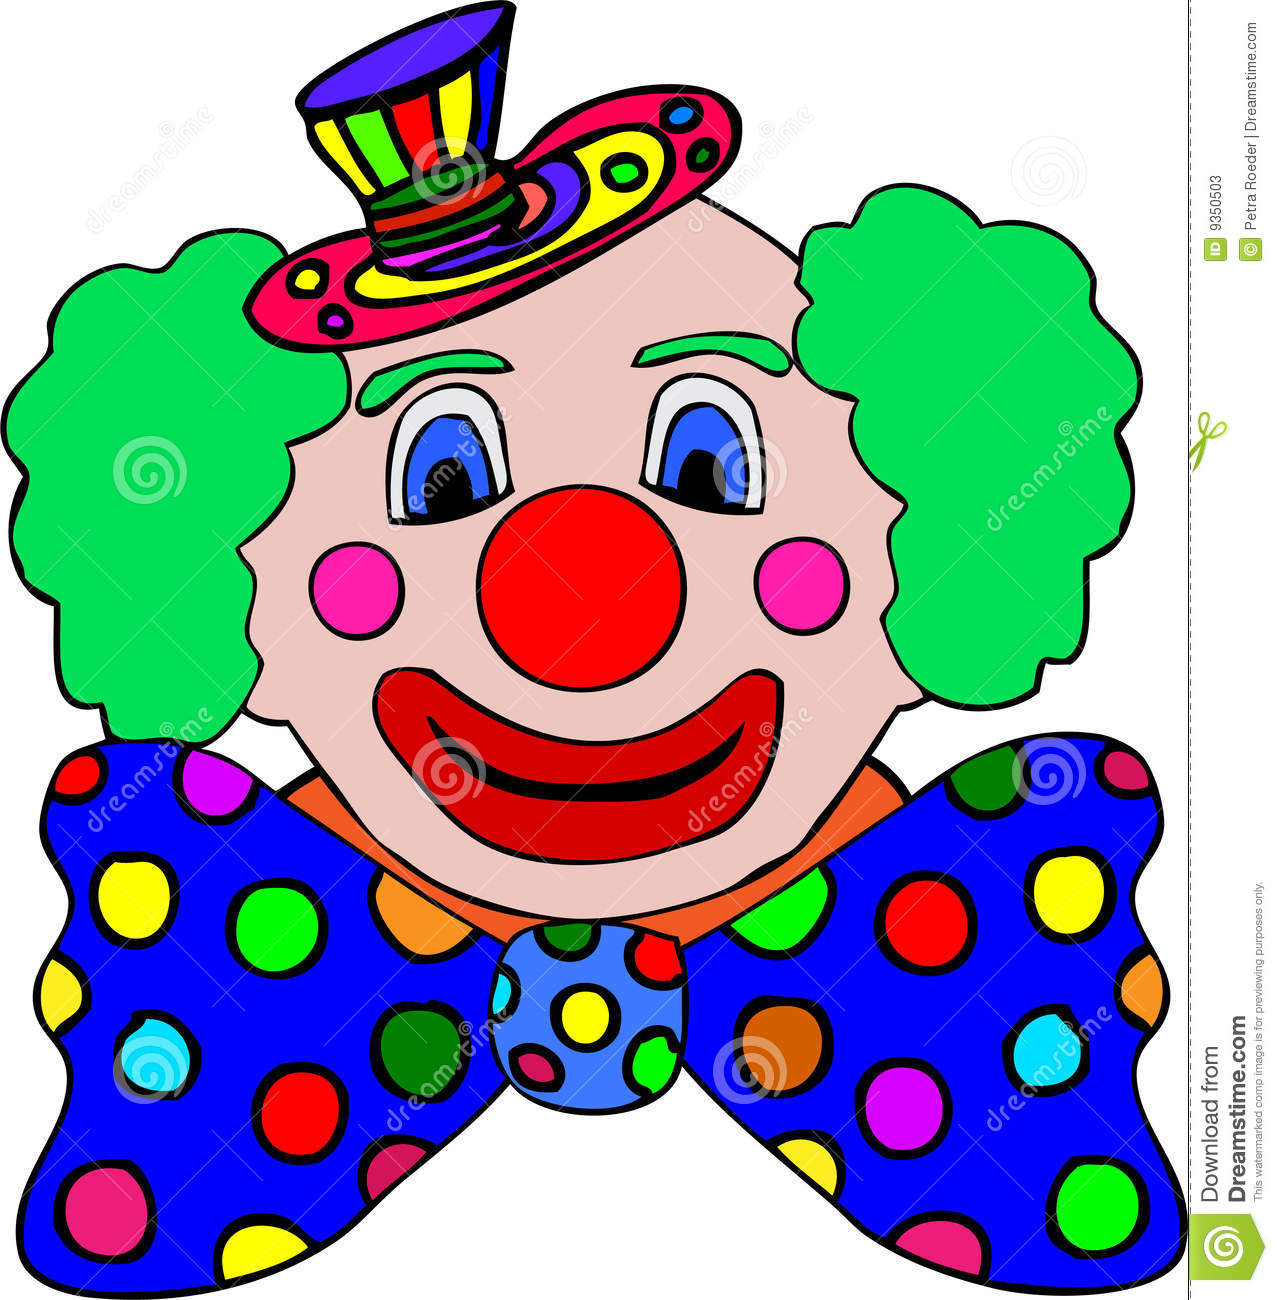 Illustration Of Colorful Clown With Large Spotted Bow Tie Isolated